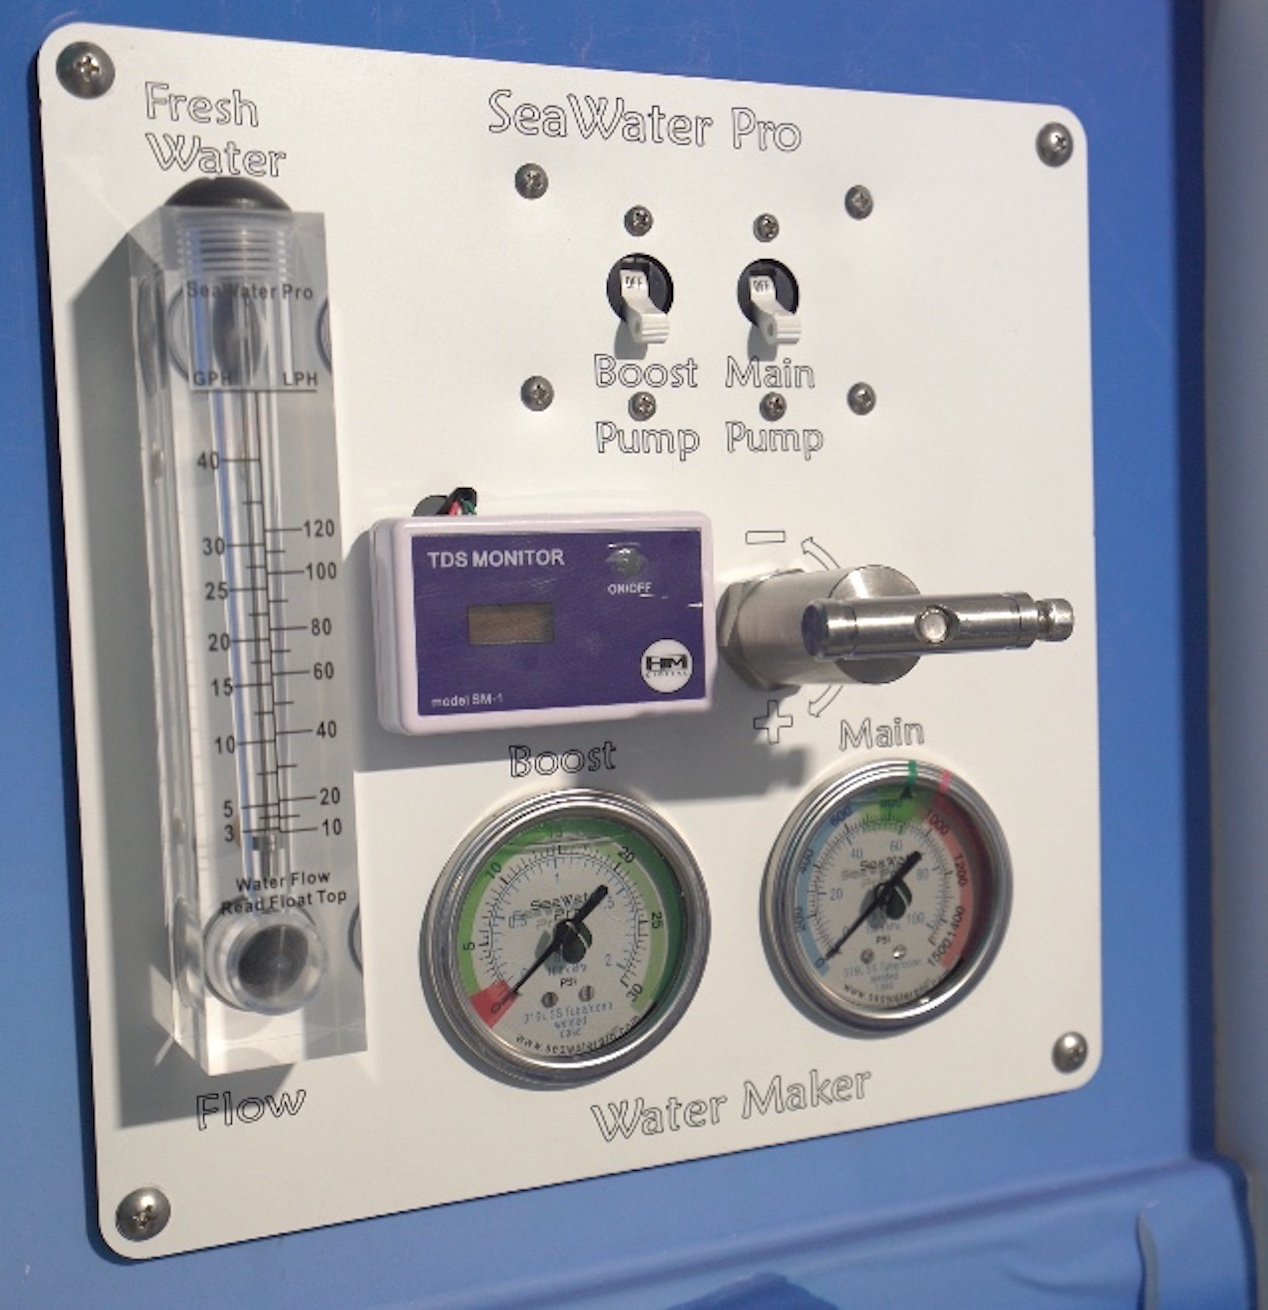 SeaWater Pro Portable Watermaker Test Video by BoatTEST.com 